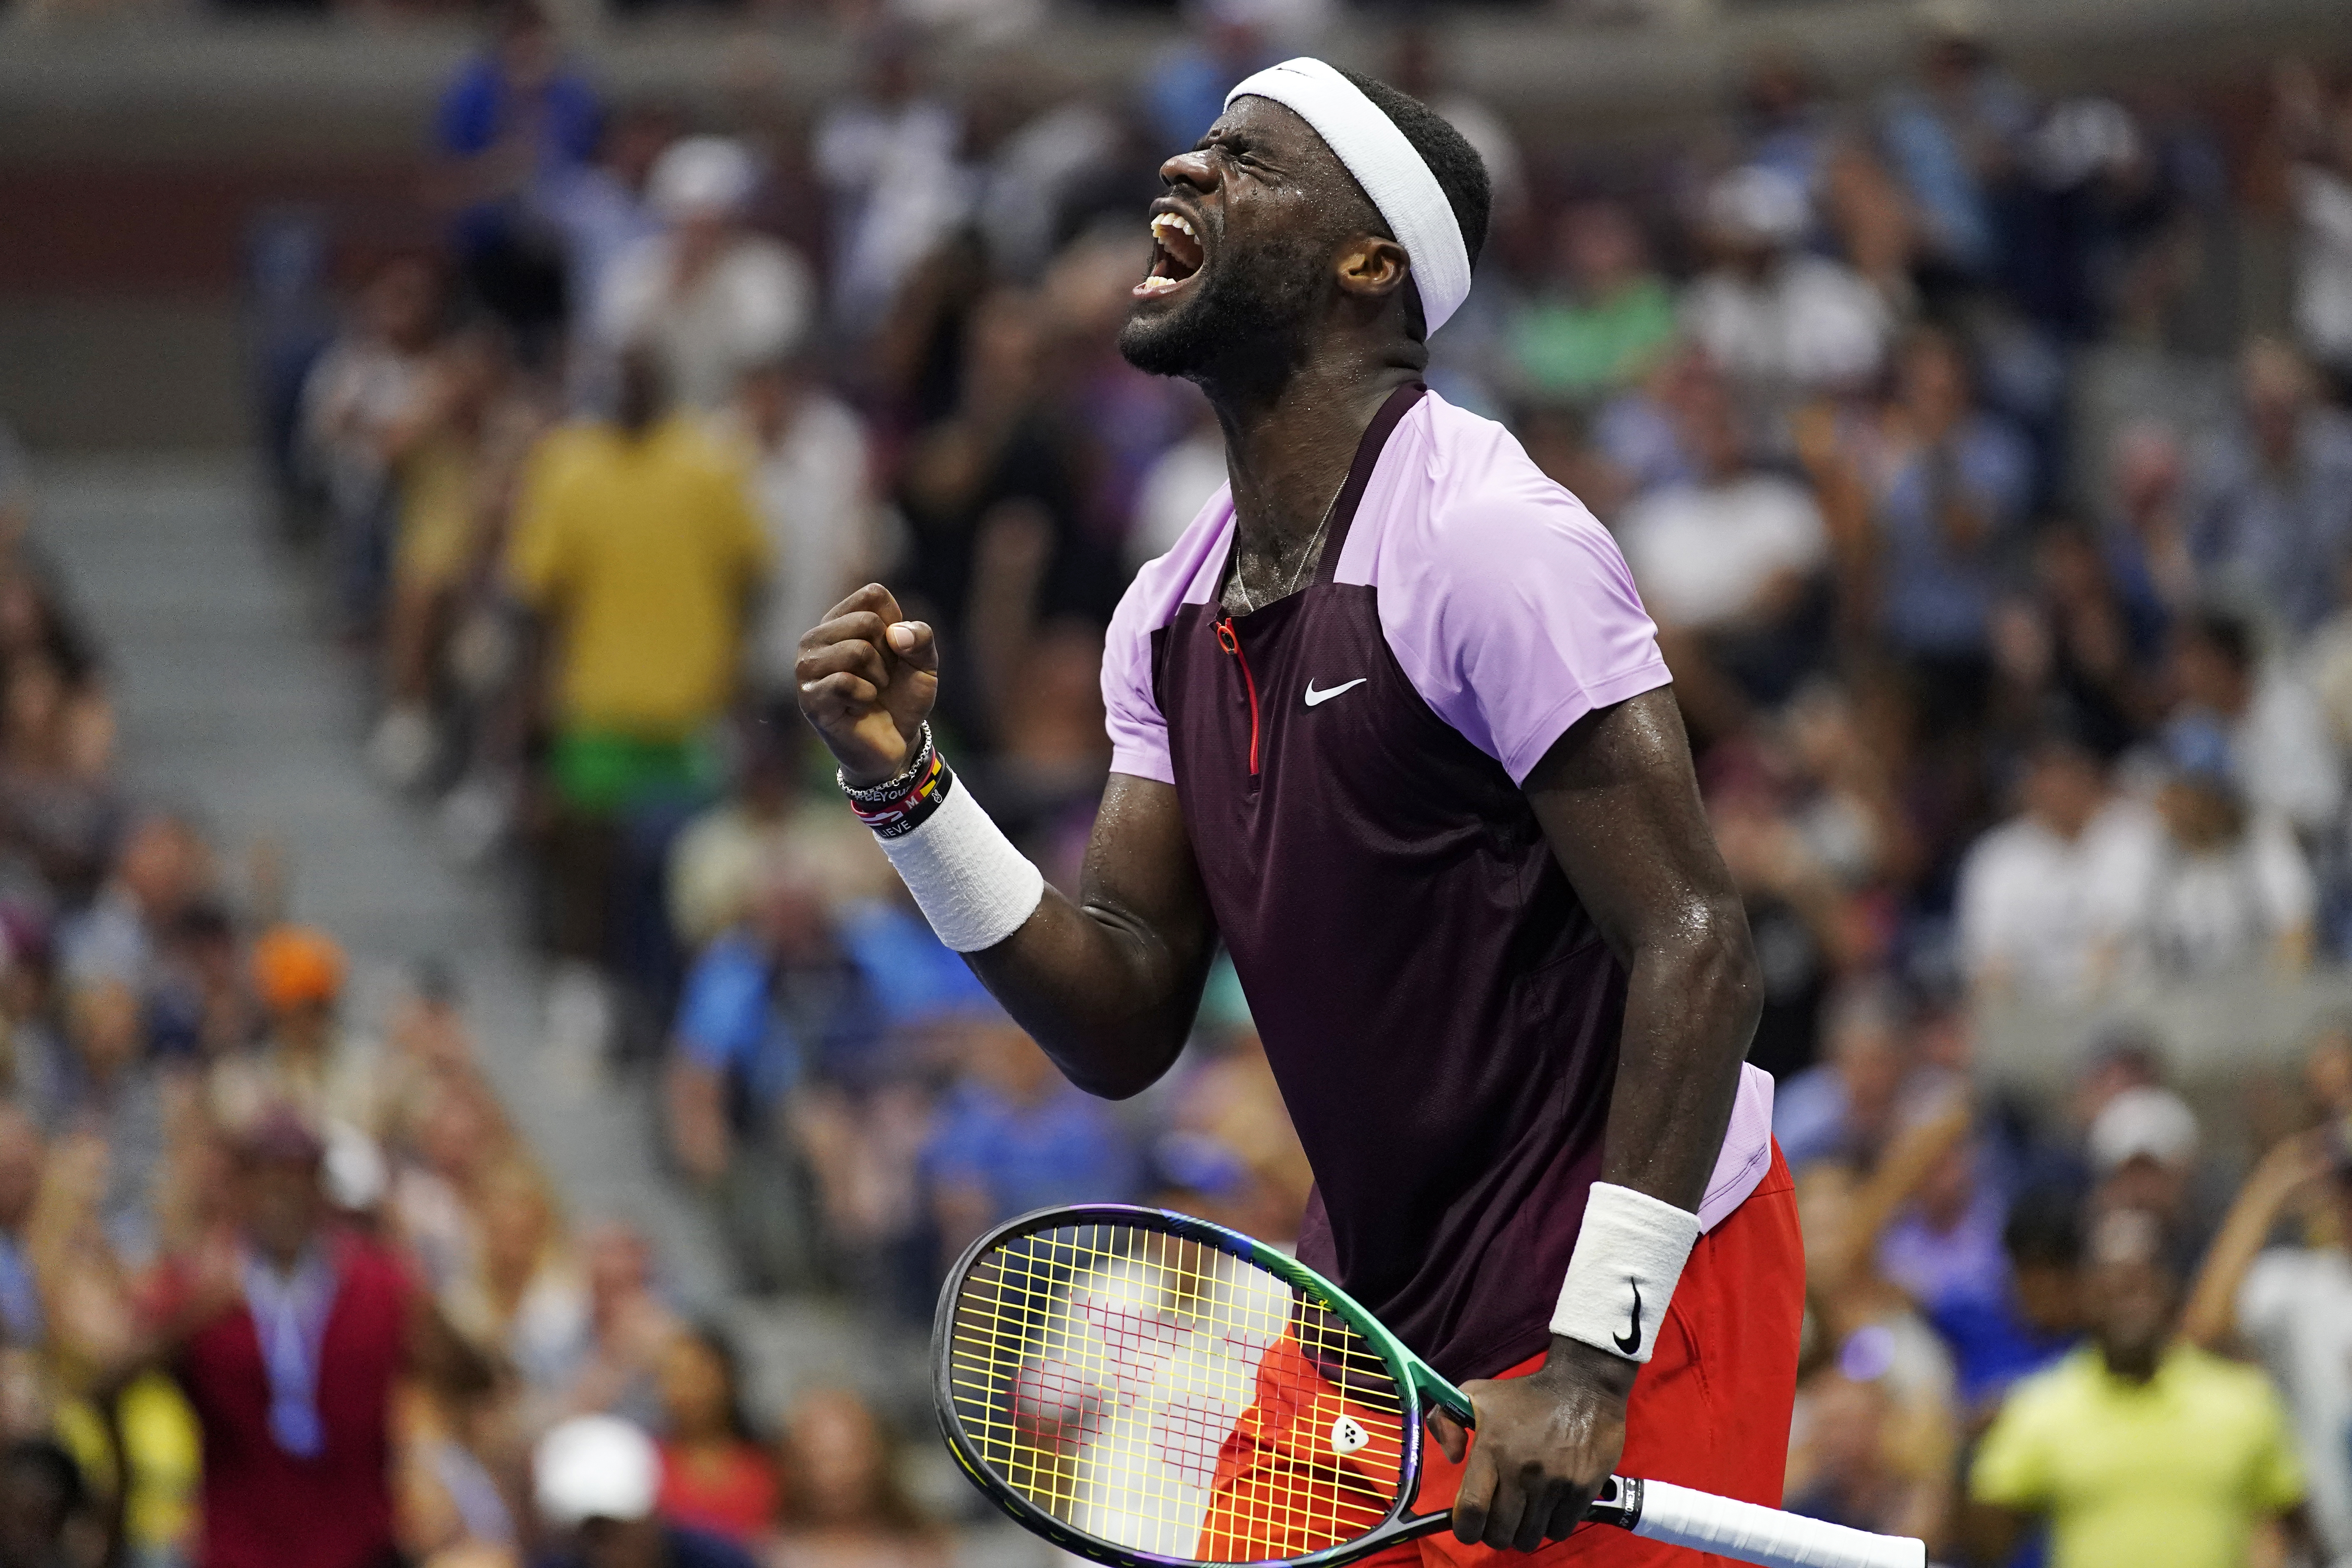 How to watch Frances Tiafoe at . Open | FREE live stream, time, TV,  channel for singles match vs. Andrey Rublev 